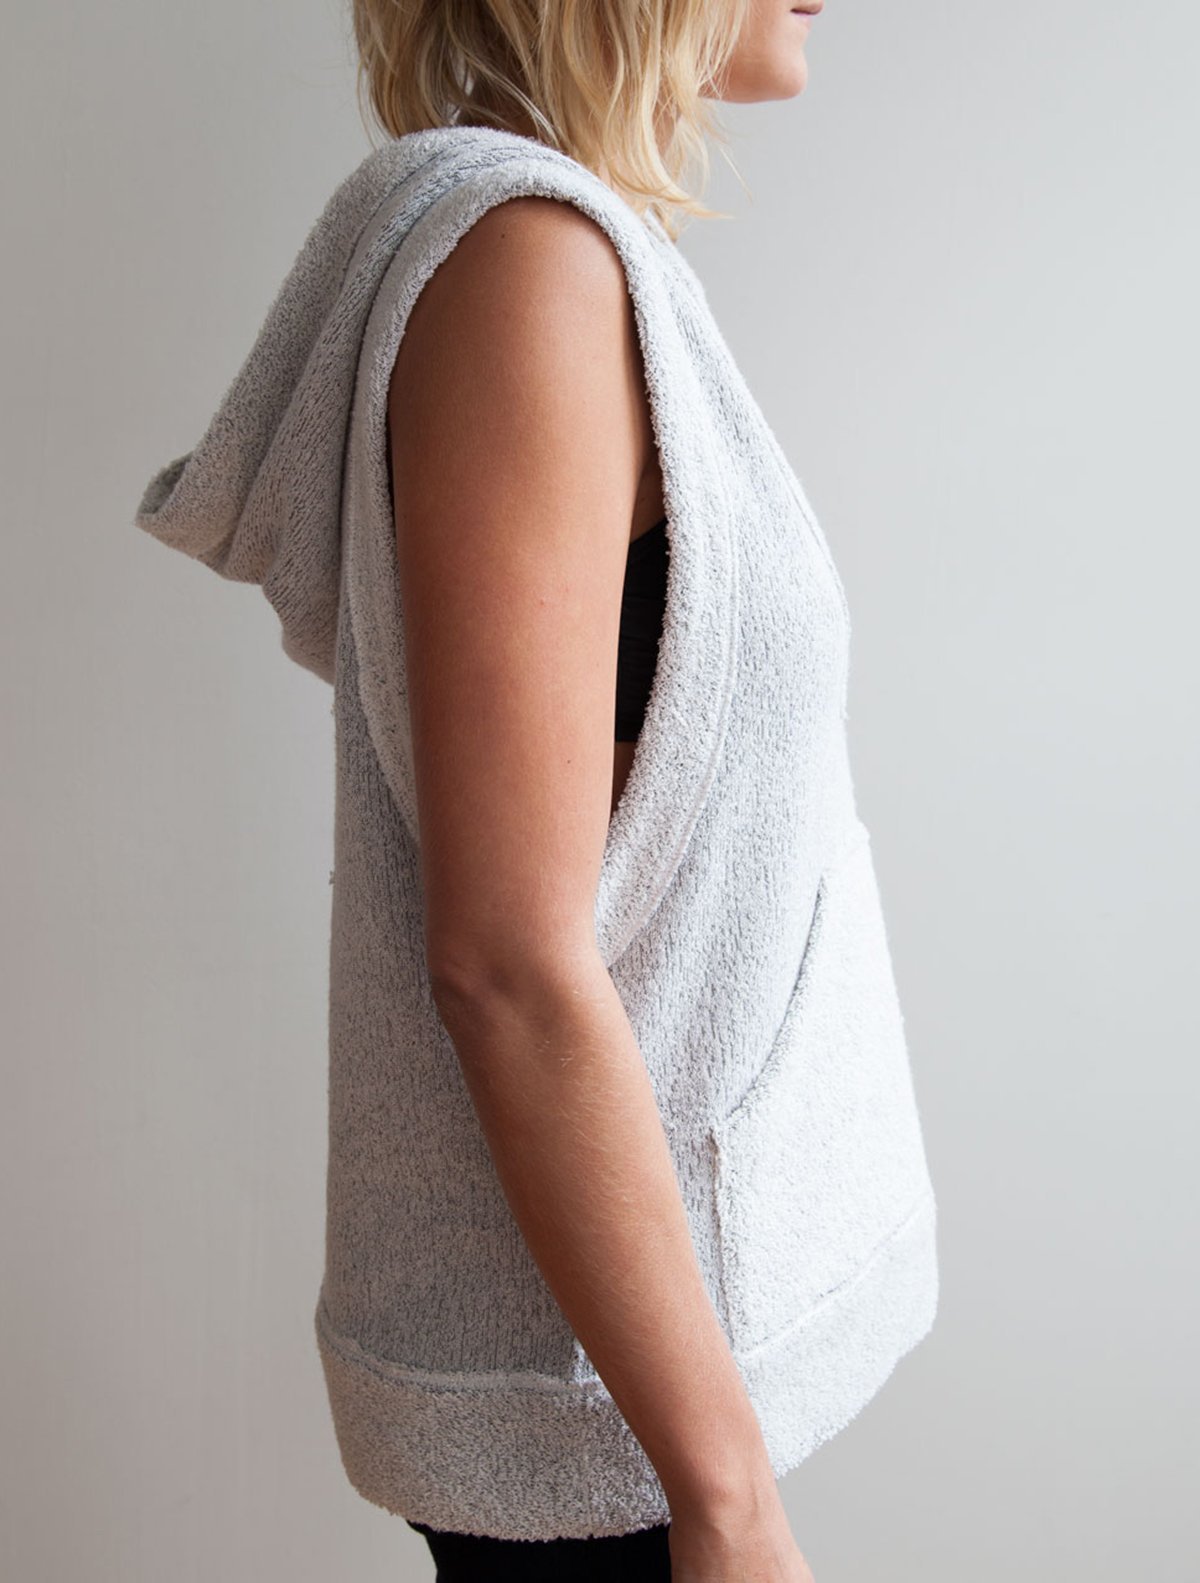 Close up side view of model wearing simulacra's women's sleeveless hoodie